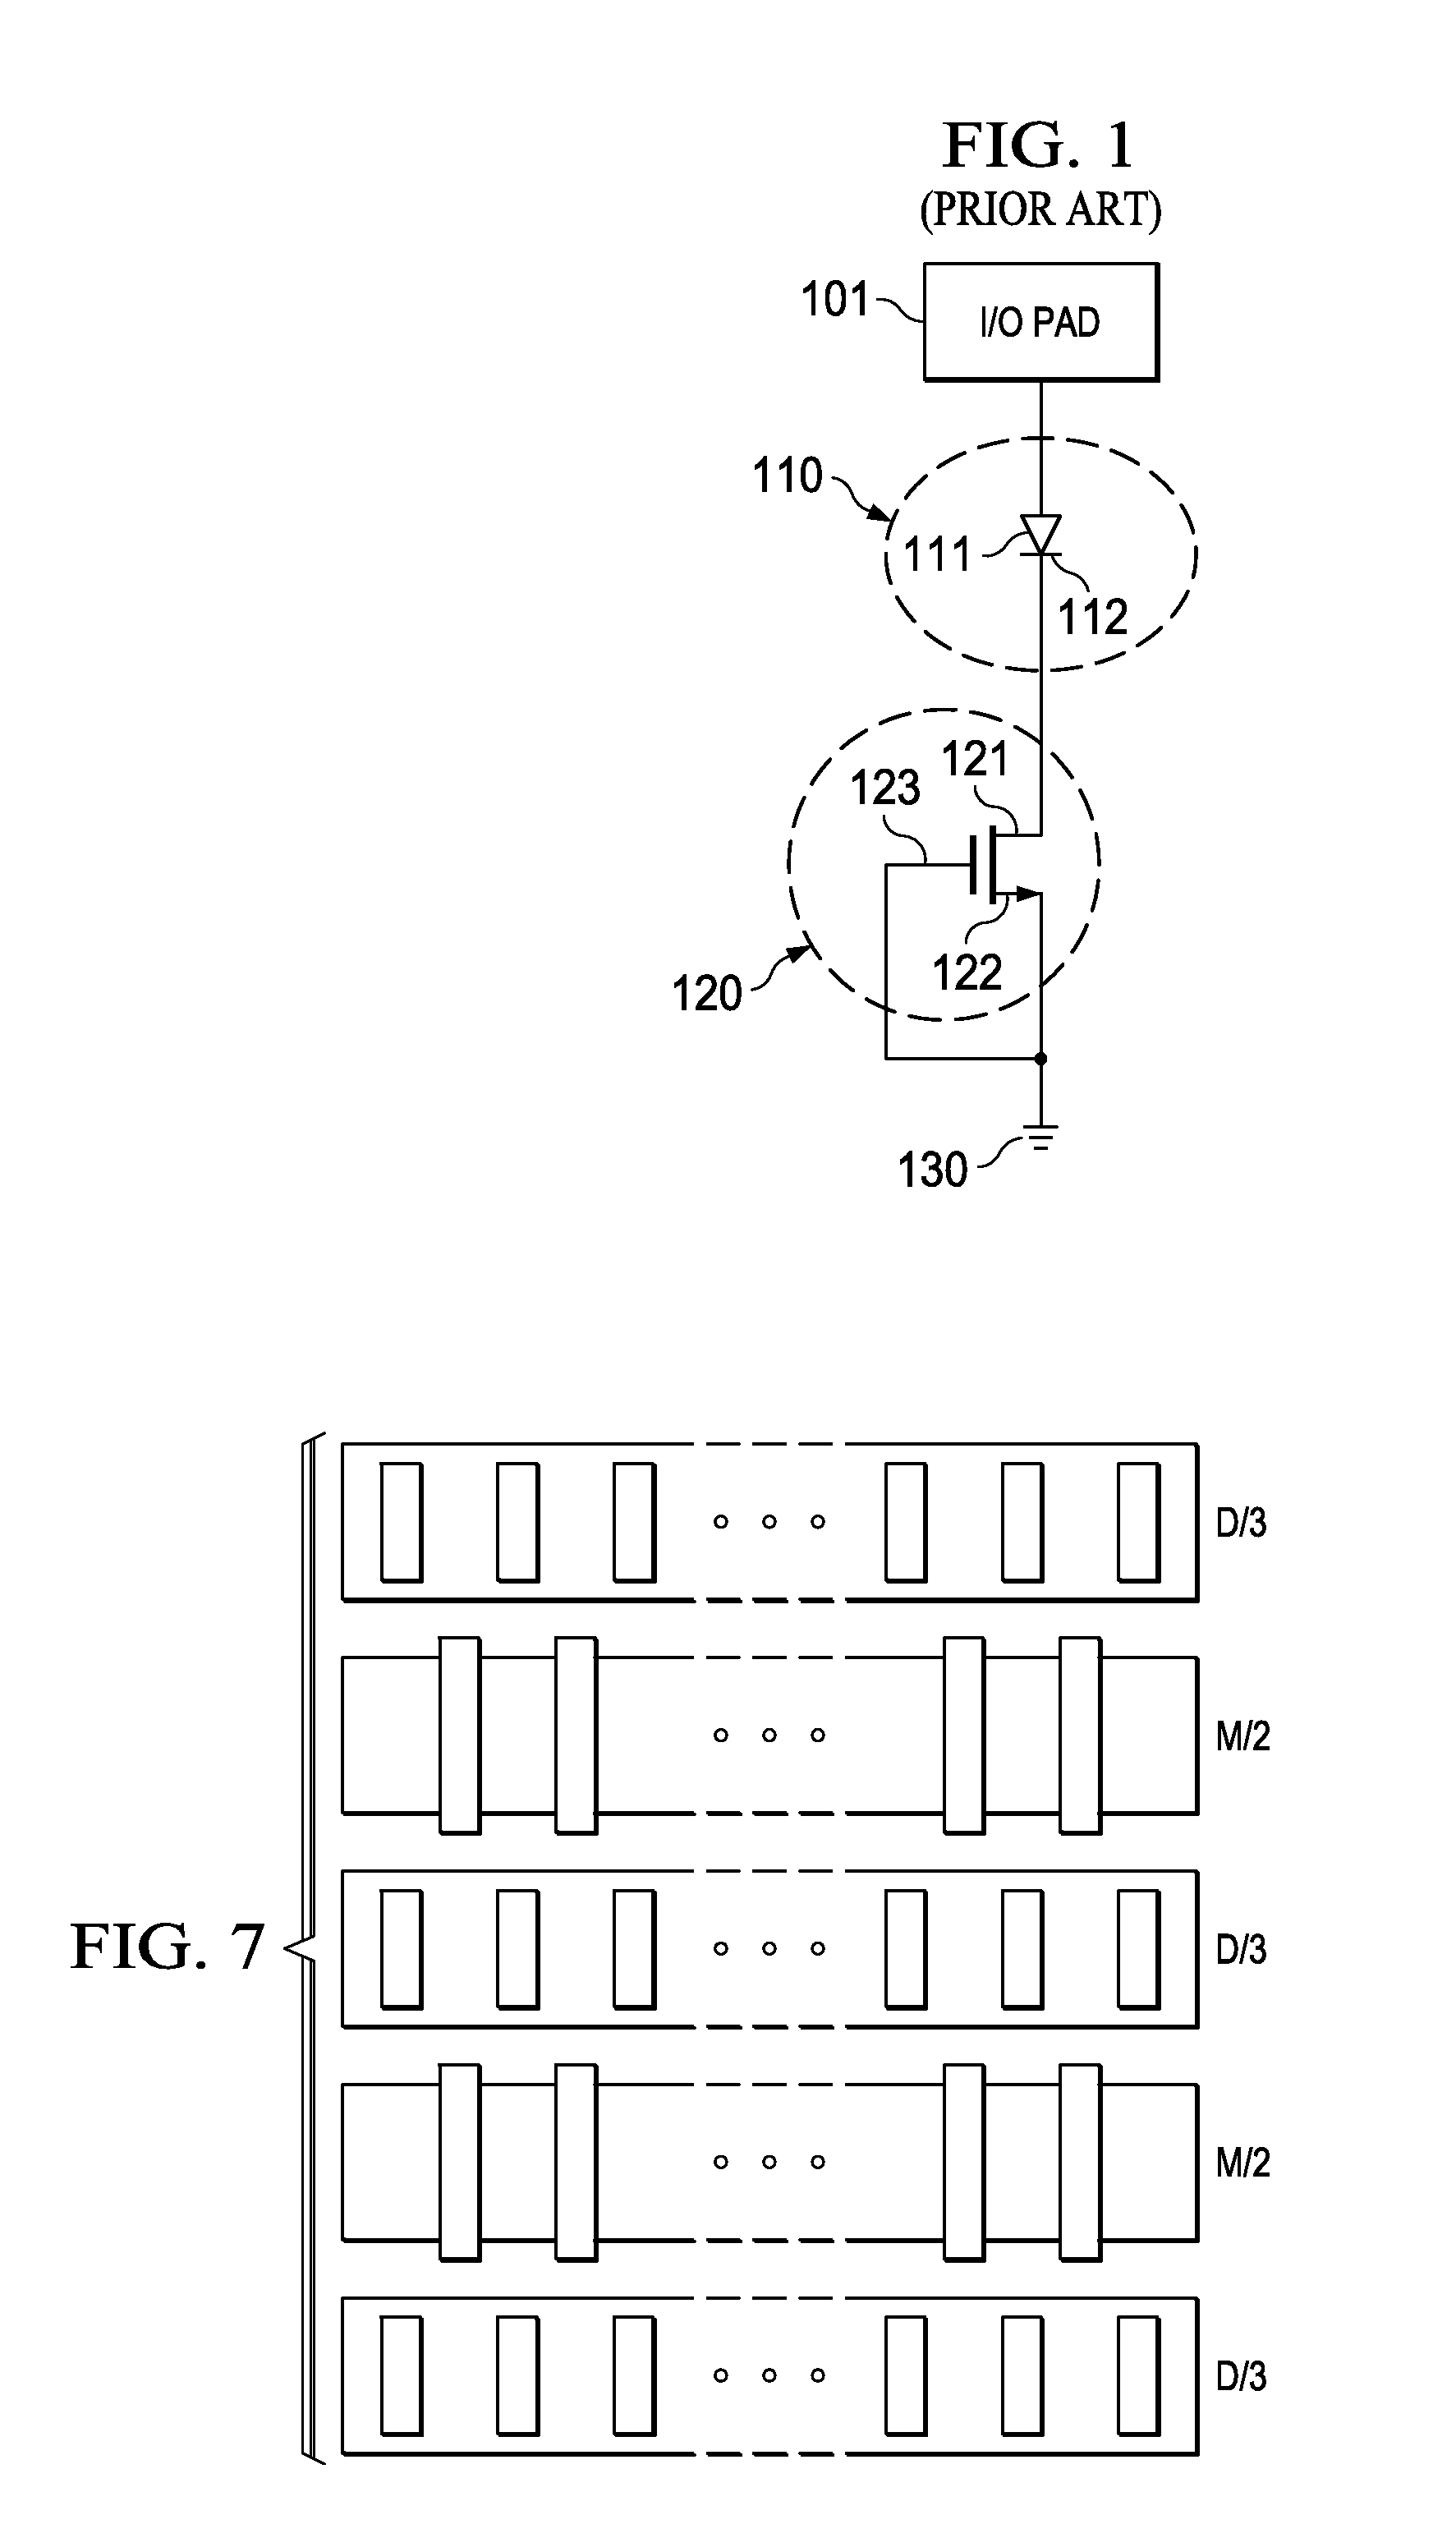 Electrostatic discharge protection having multiply segmented diodes in proximity to transistor